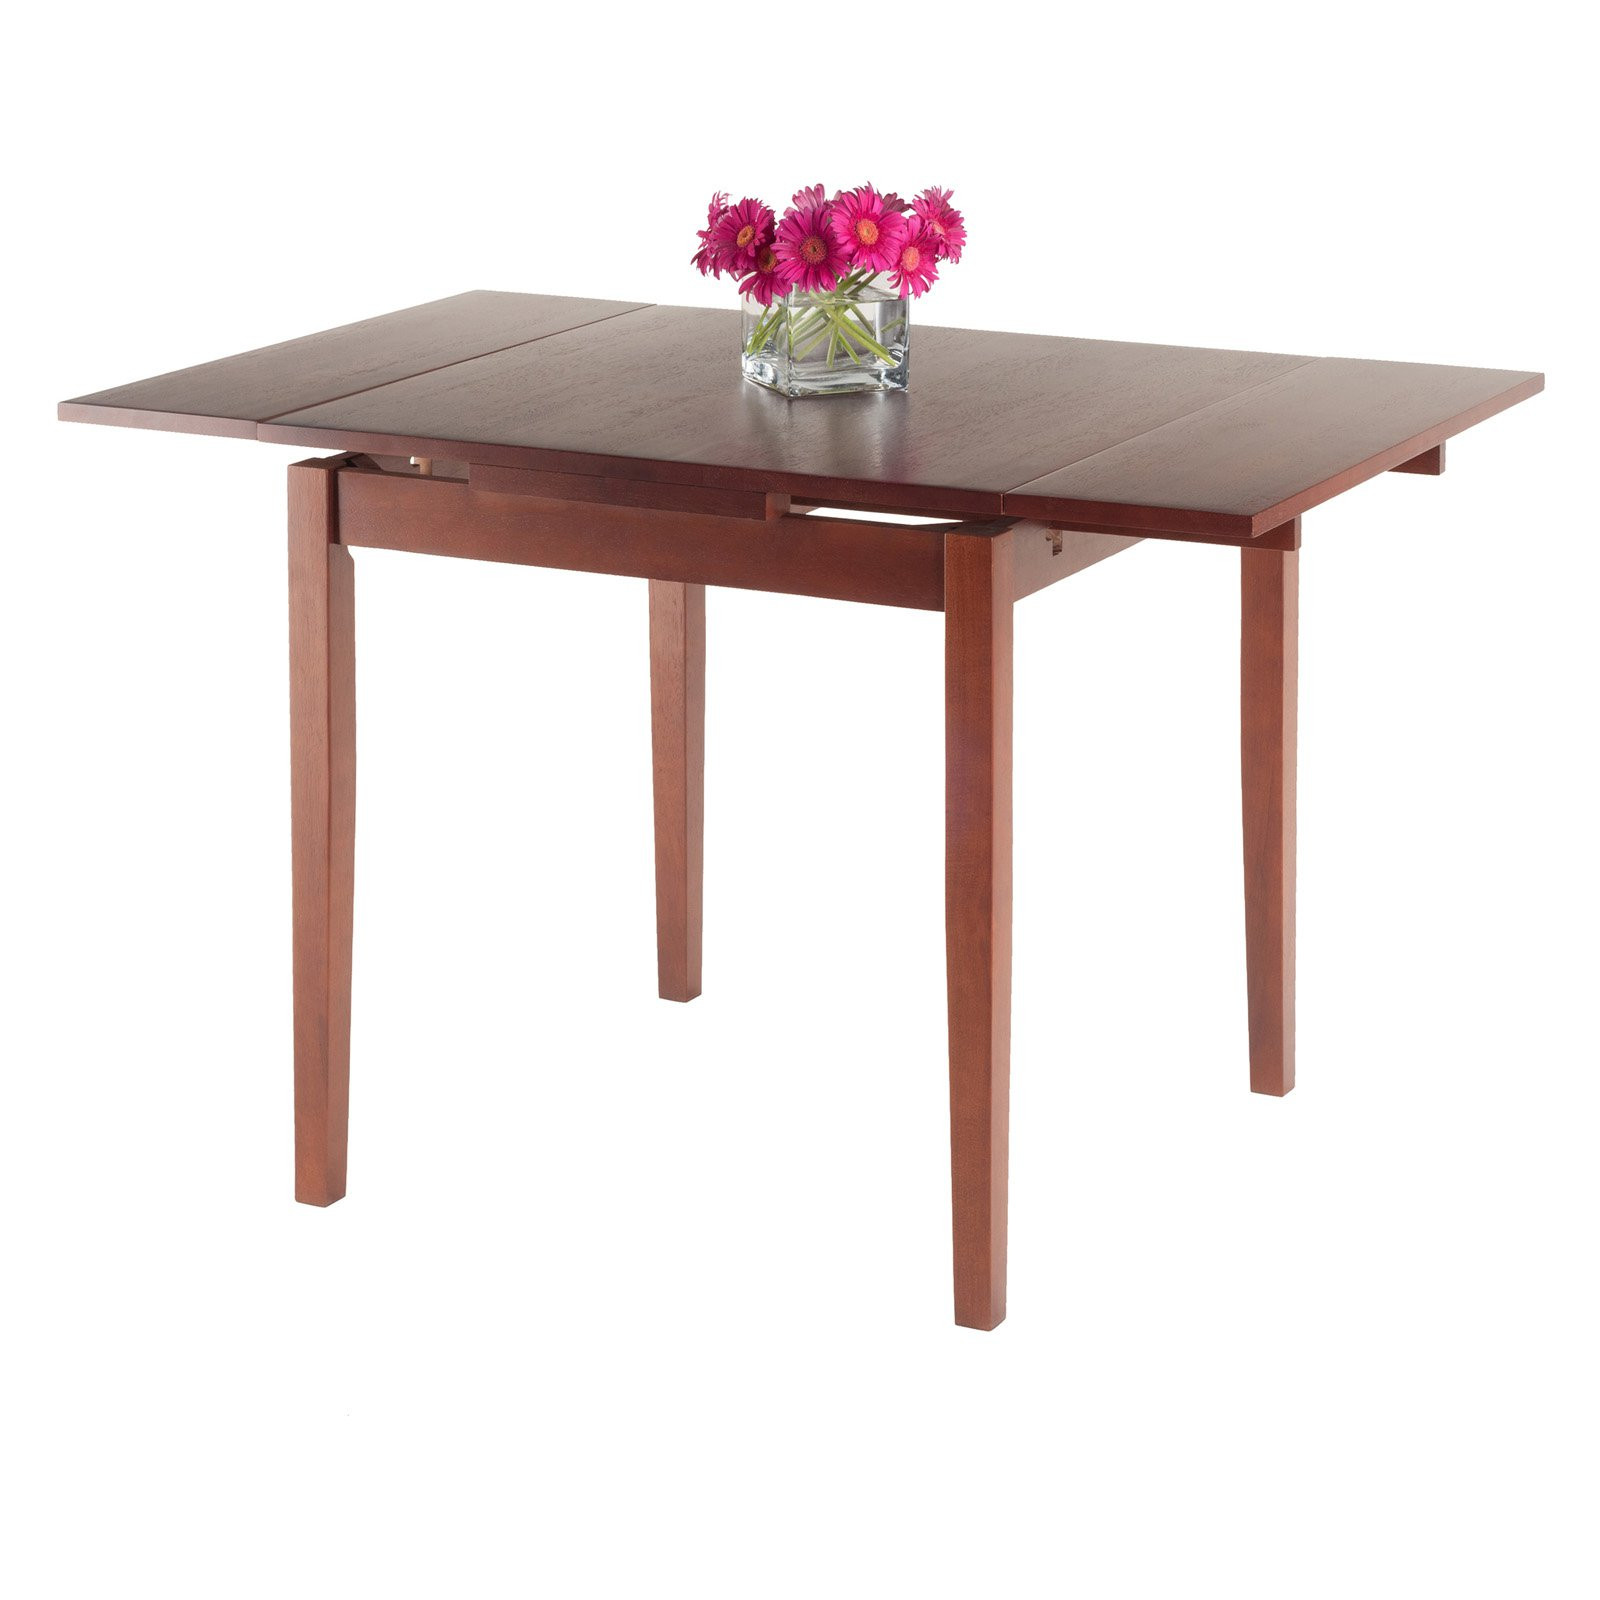 Small Wood Kitchen Table
 pact Extension Dining Table Small Wood Kitchen Folding Rectangular Furniture